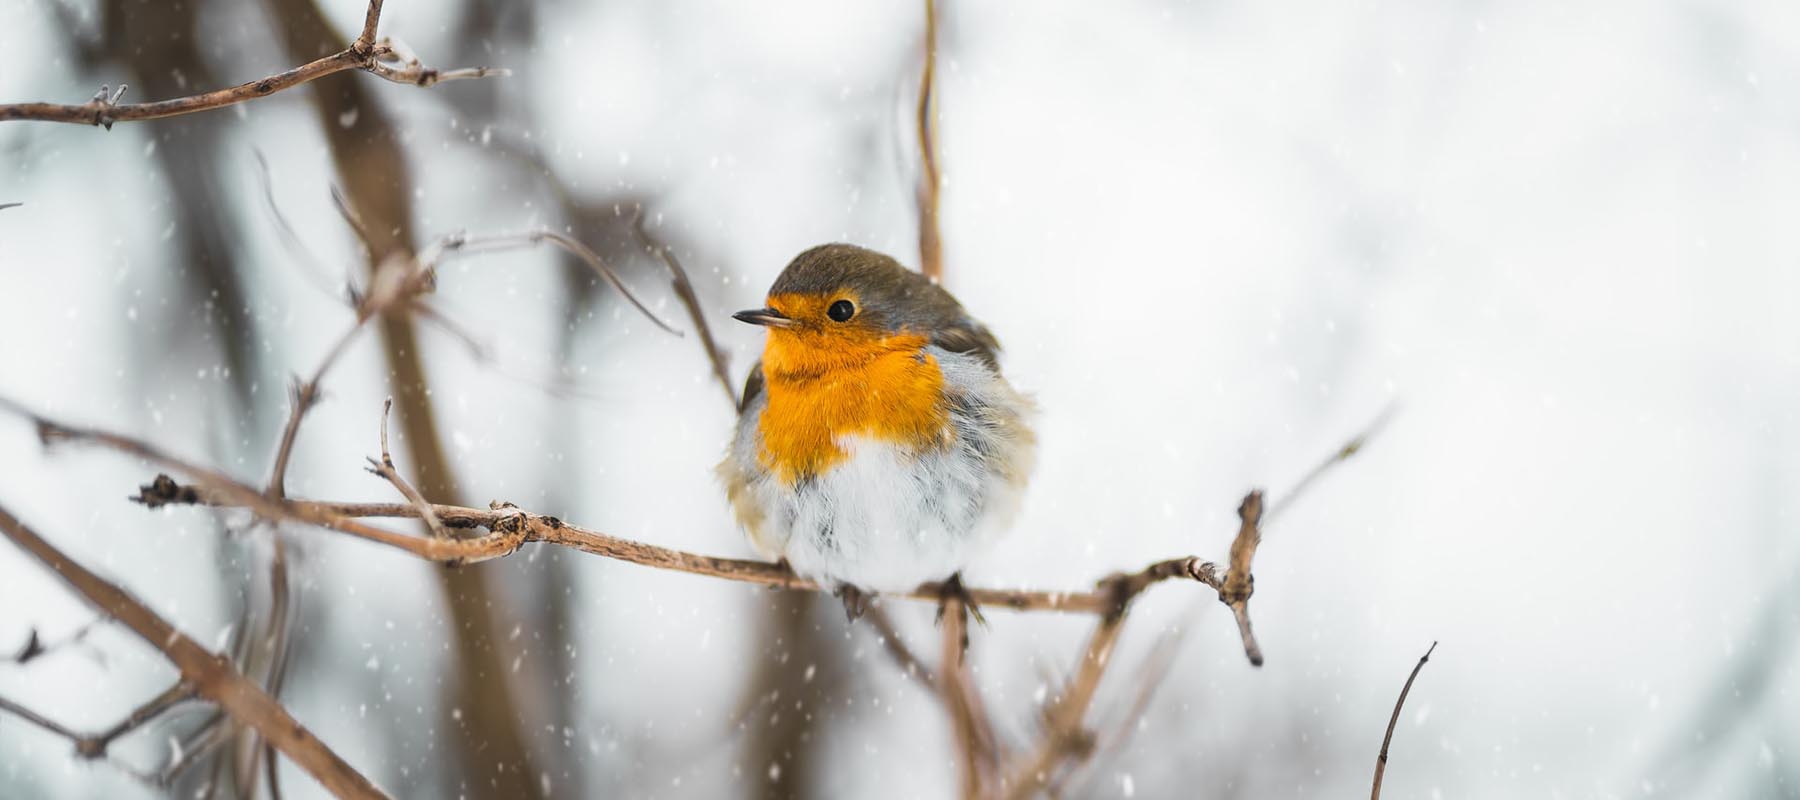 Robin sitting on a snow covered branch